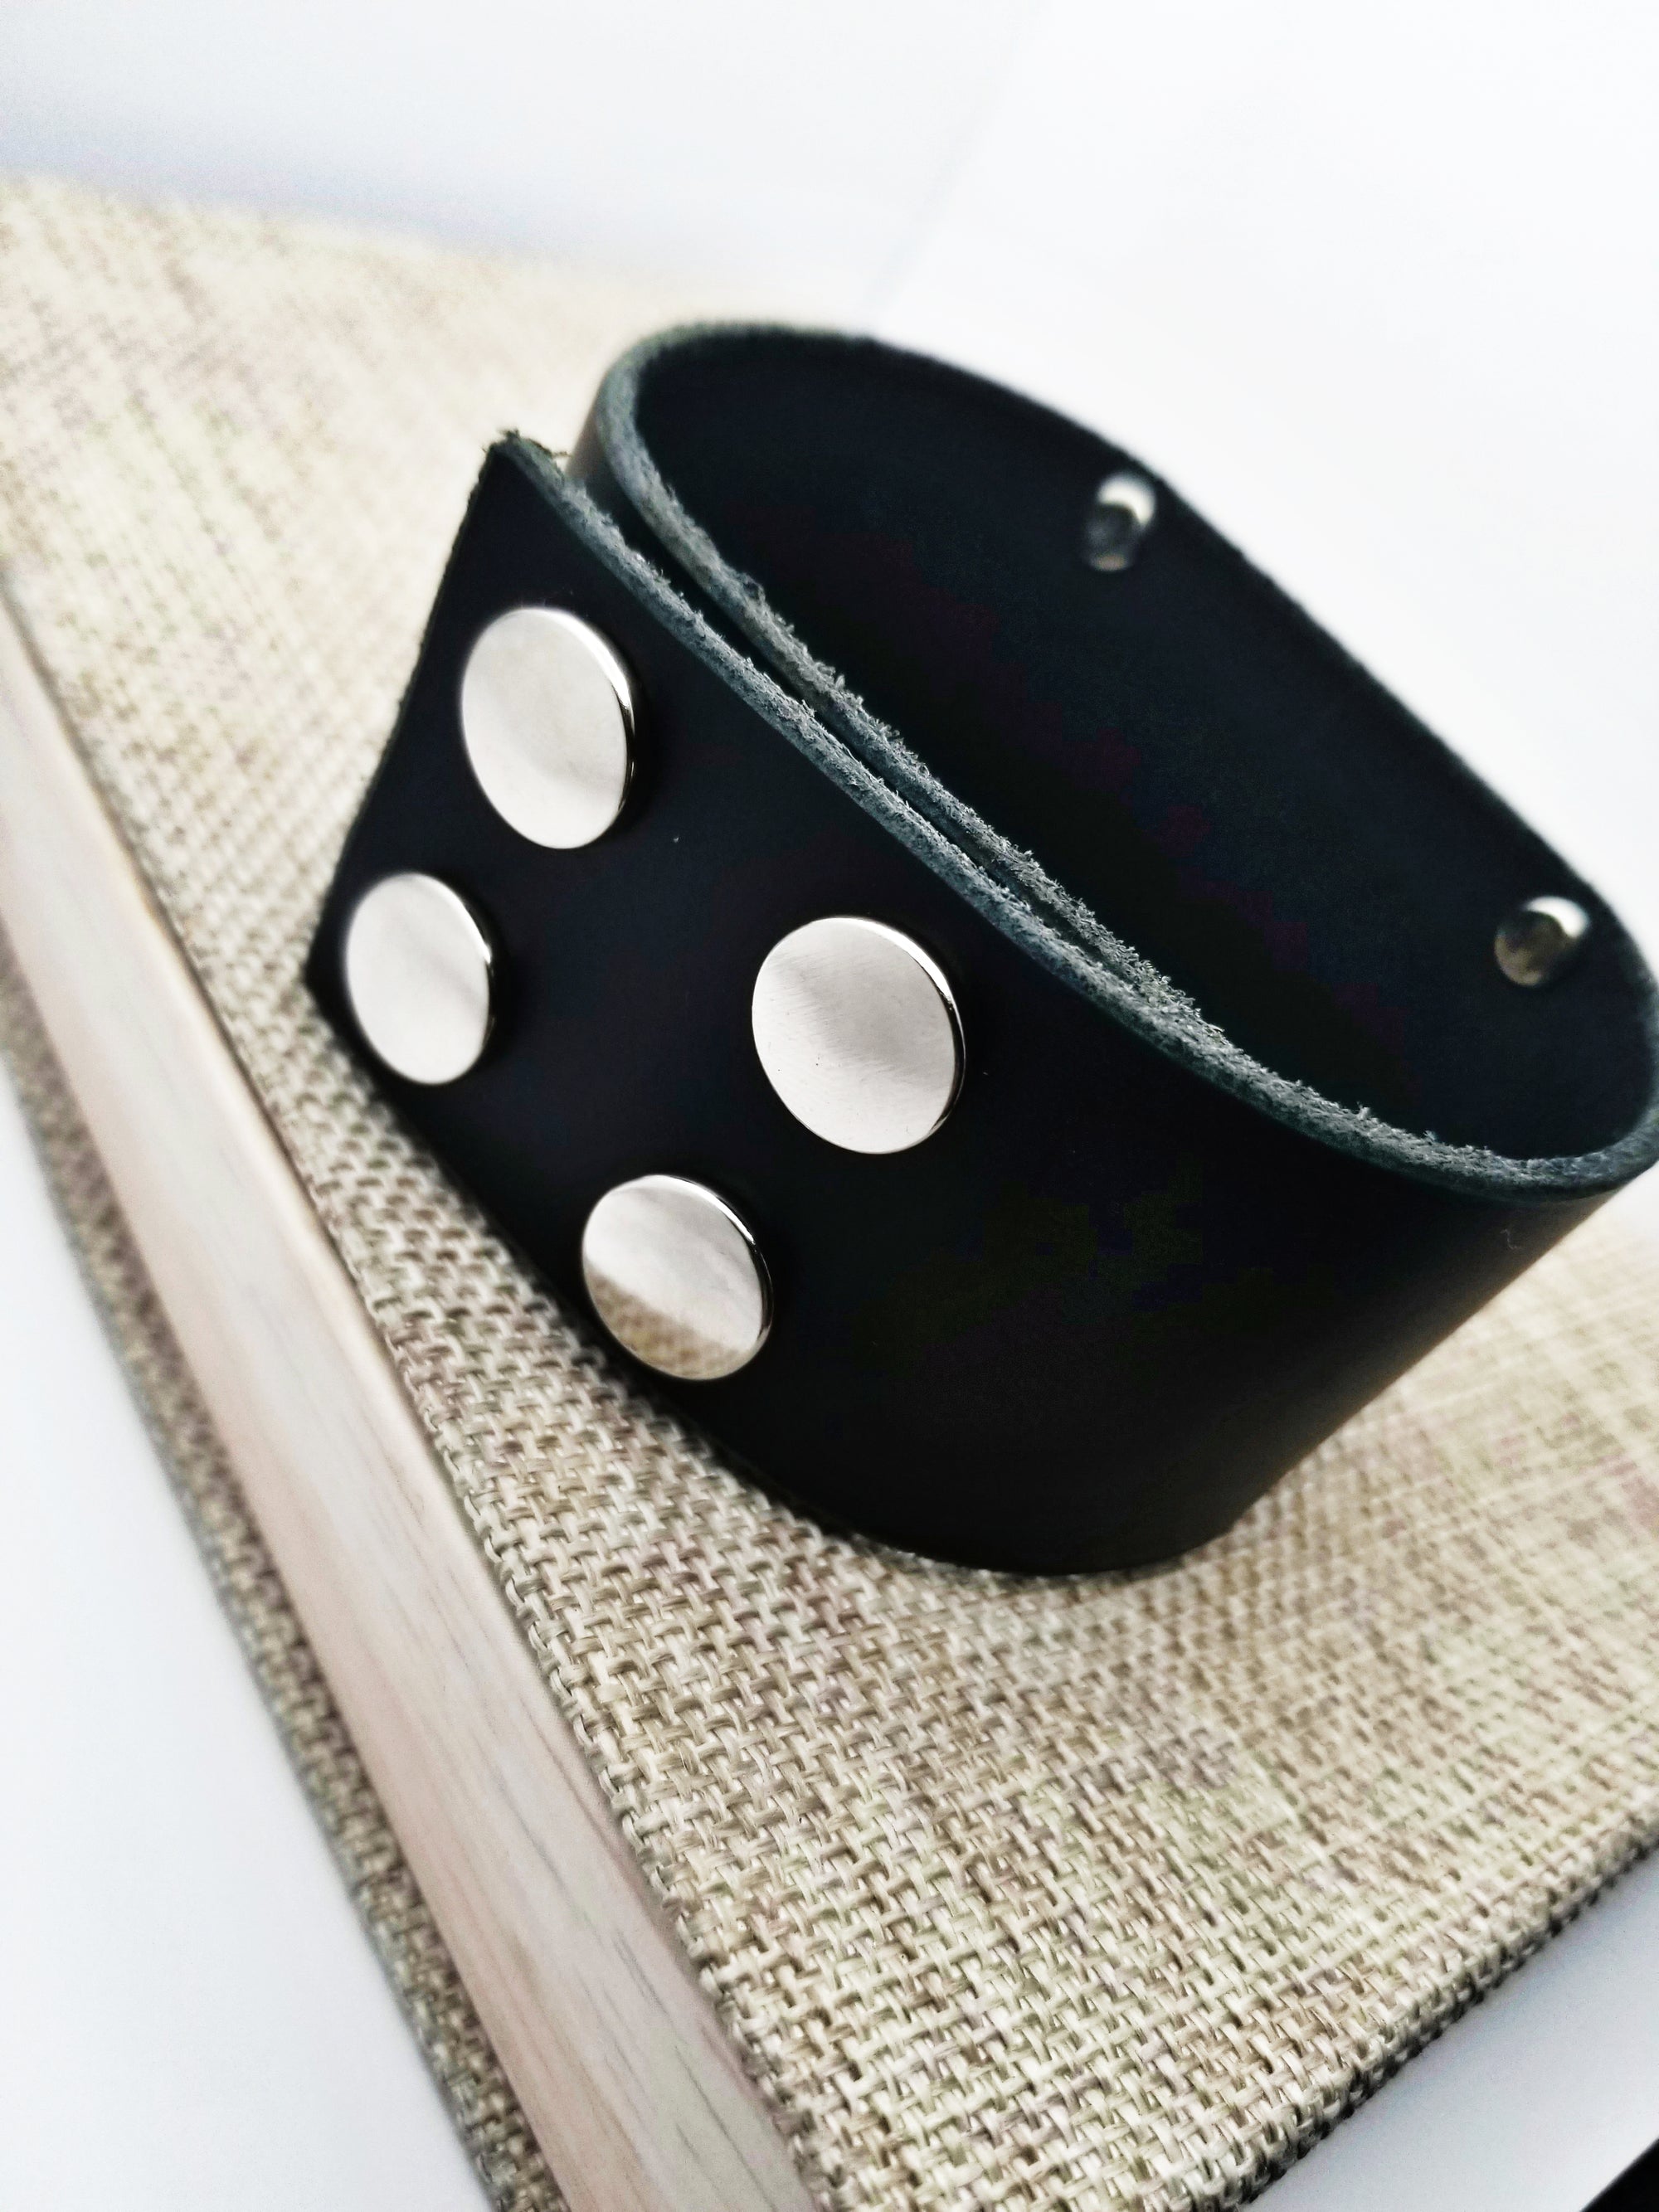 Valentine's Gift, Funny Gift for him, Custom Leather Cuff, Funny Bracelet Cuff, Valentine's Leather Cuff